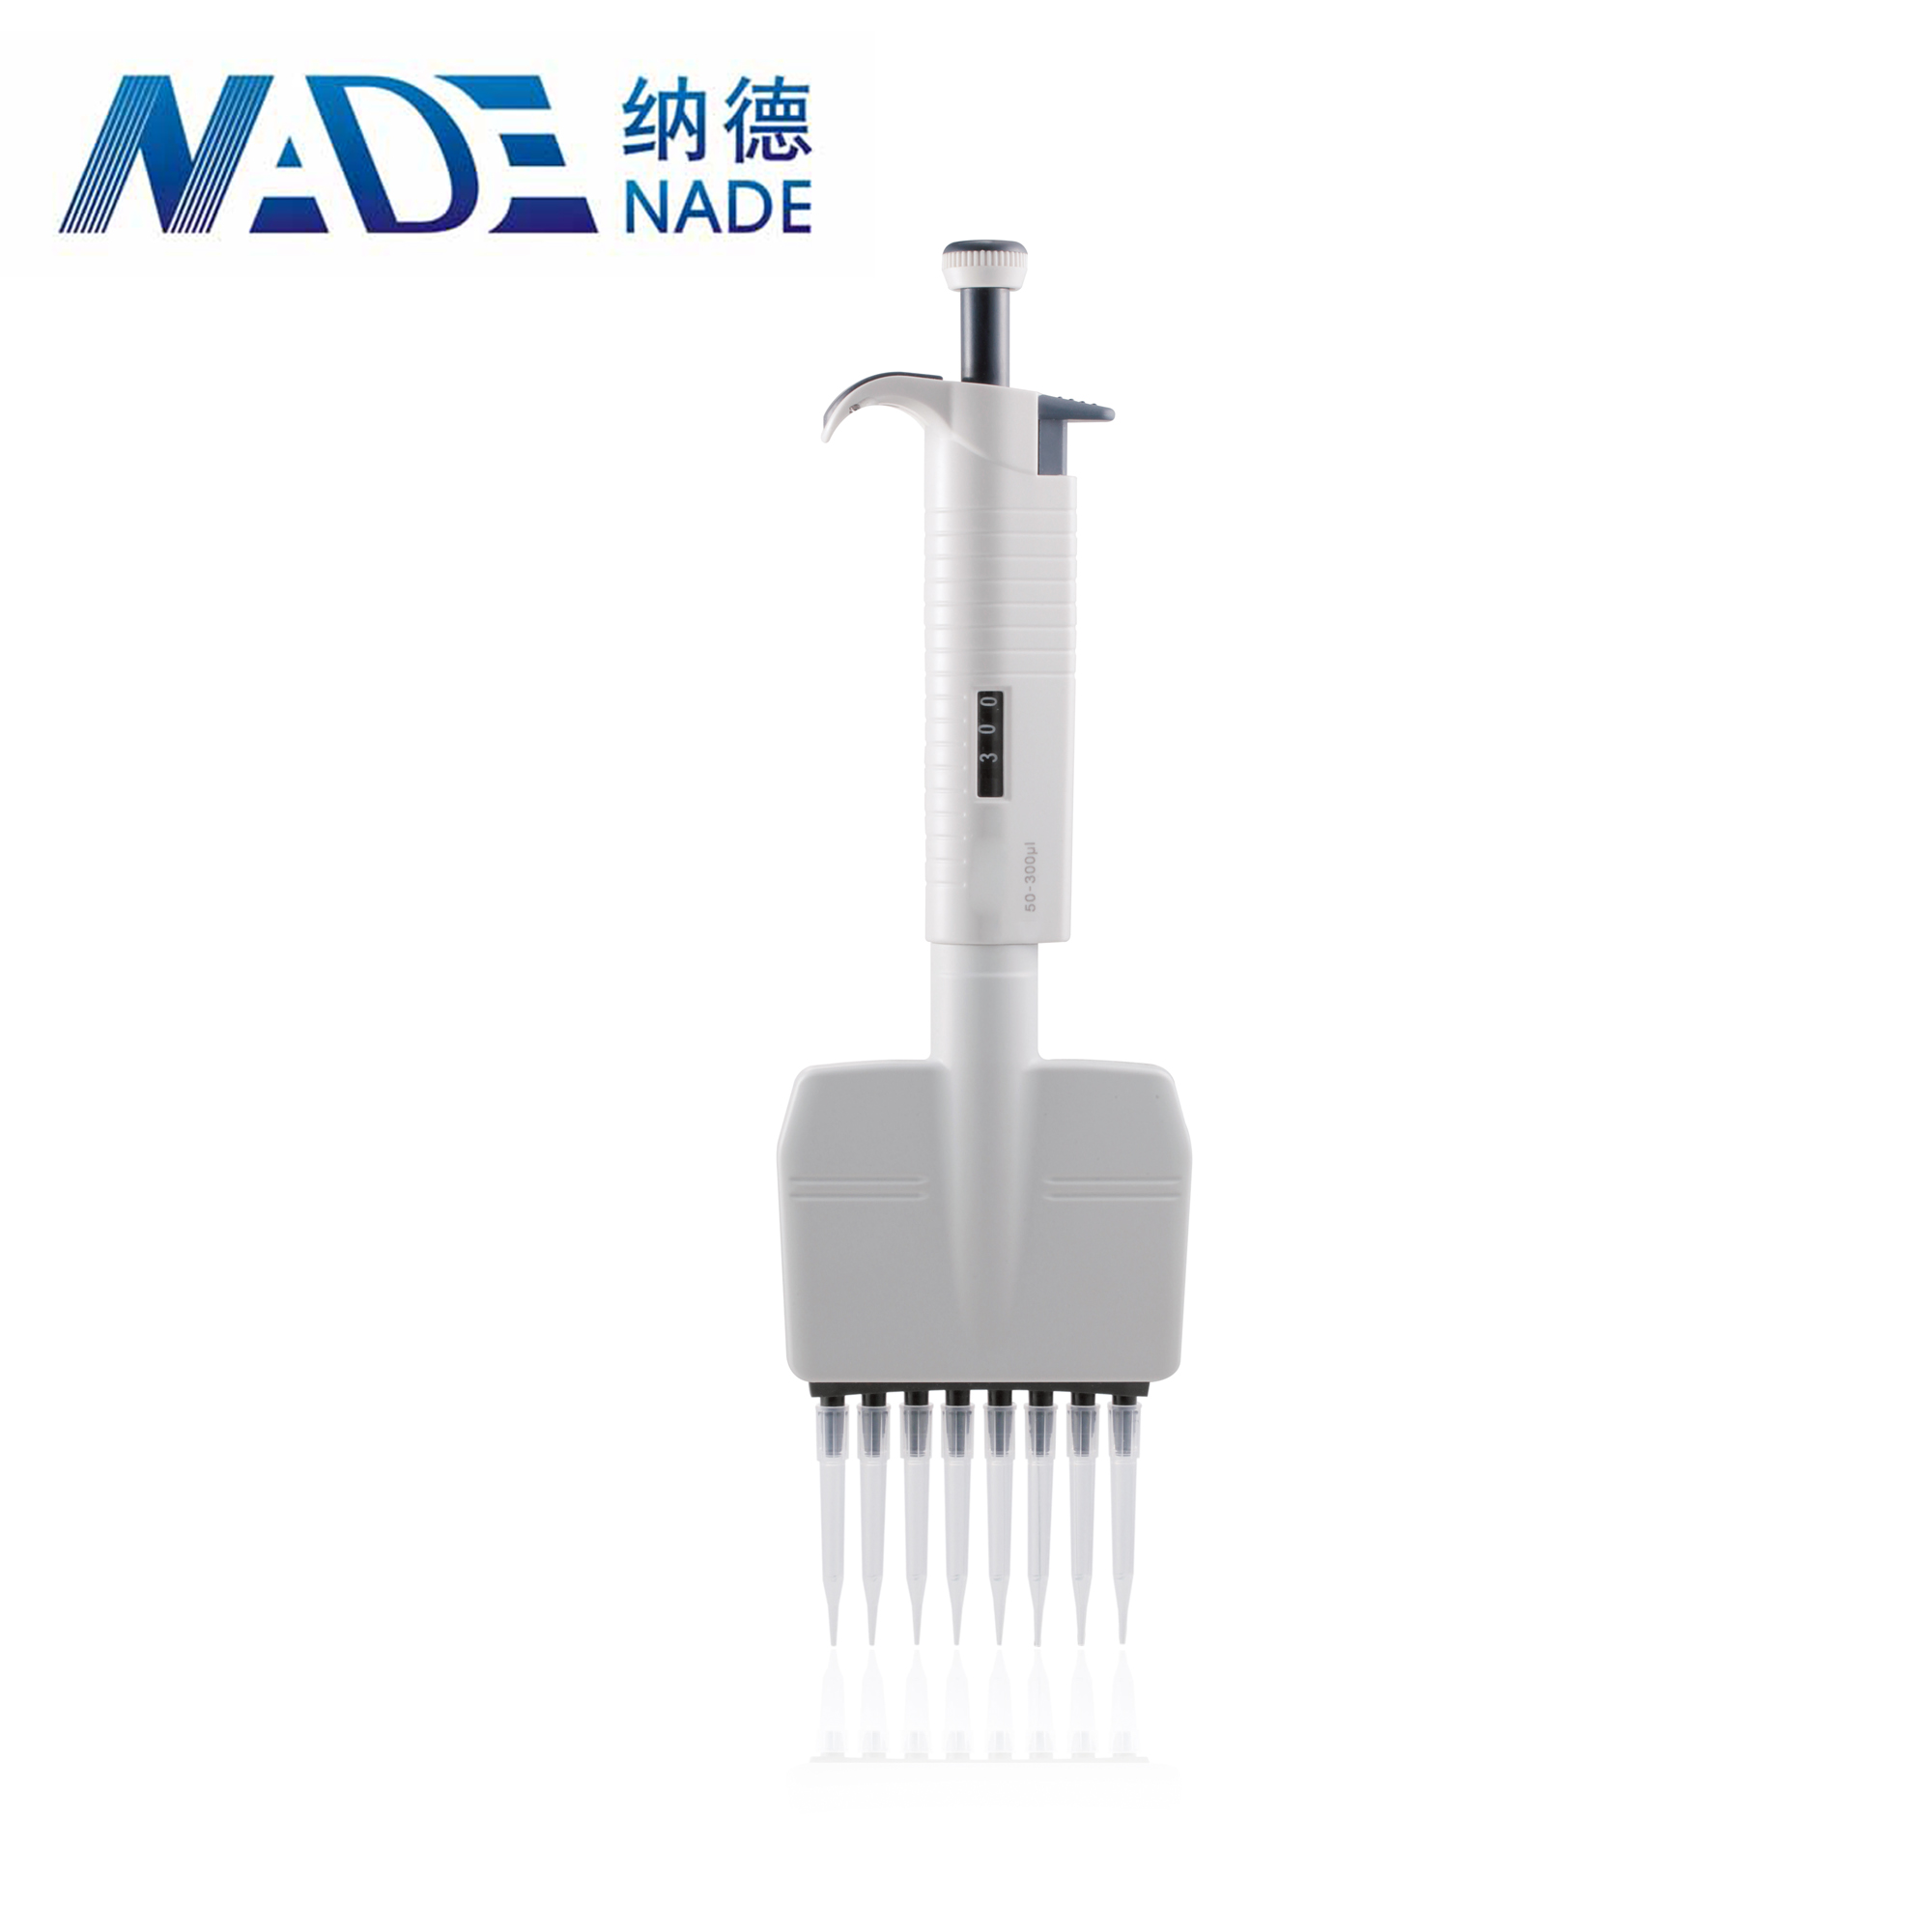 Nade Lab Pipette 8-channel Adjustable Volume MicroPette Autoclavable Pipettor 0.5-300ul